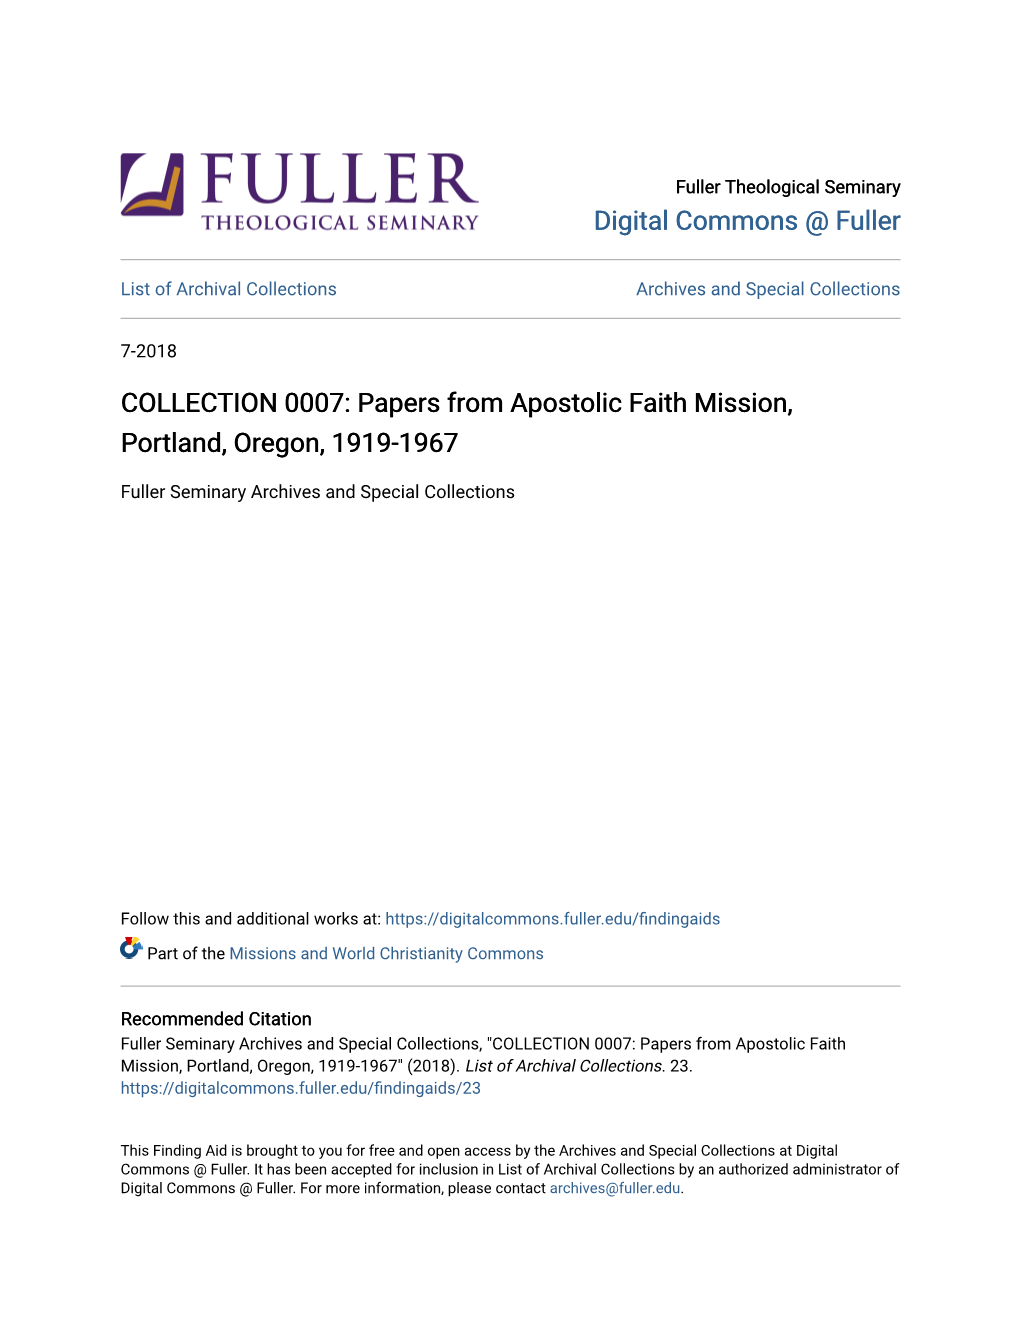 Papers from Apostolic Faith Mission, Portland, Oregon, 1919-1967